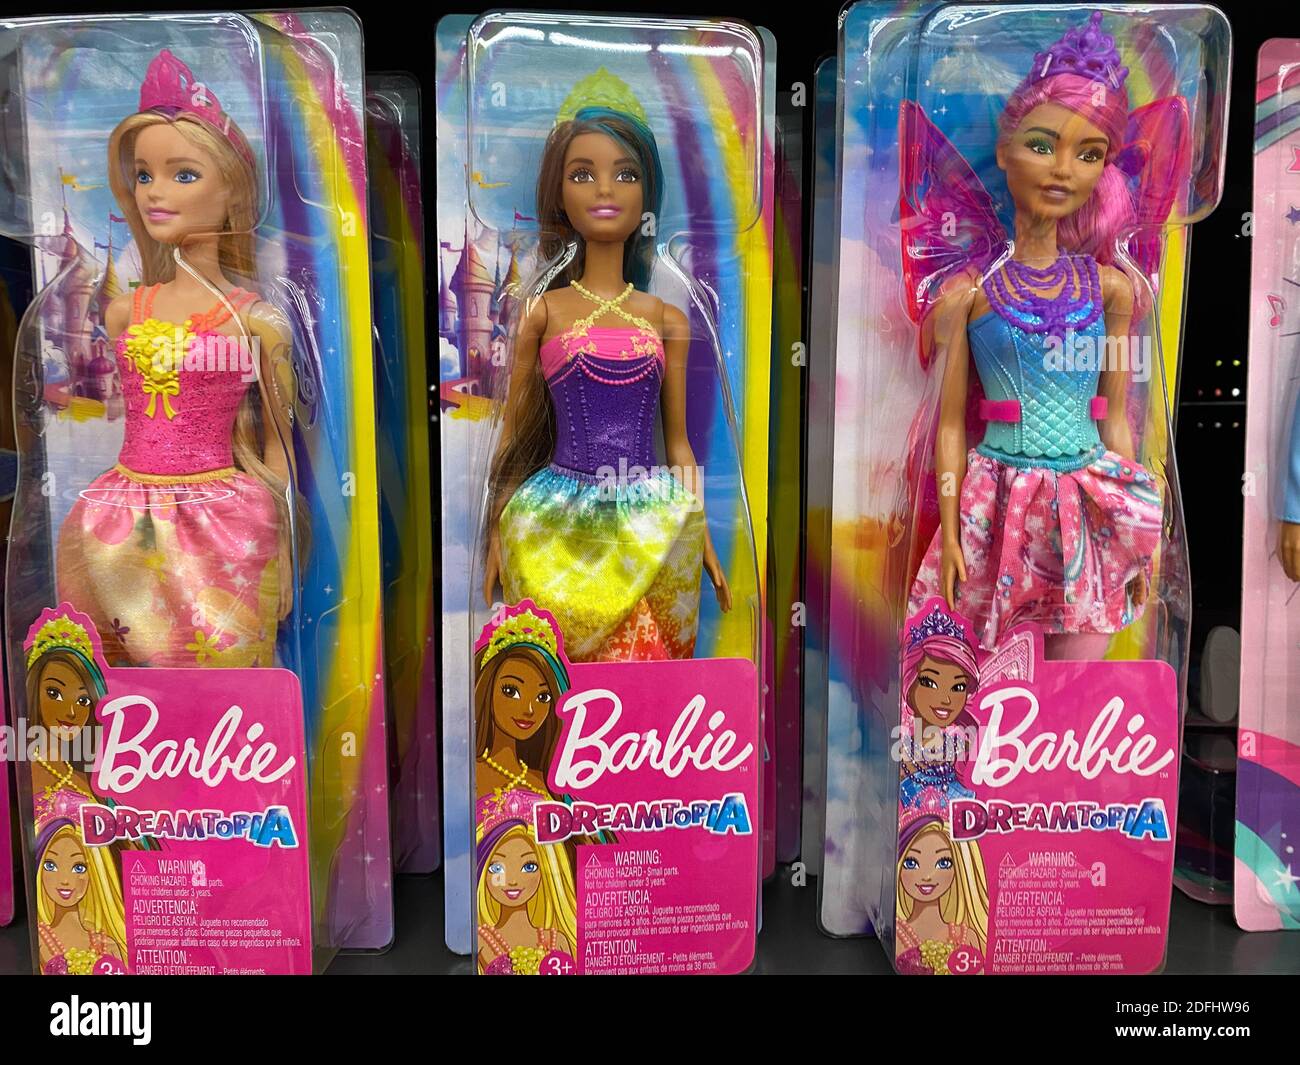 Barbie Market High Resolution Stock Photography and Images - Alamy